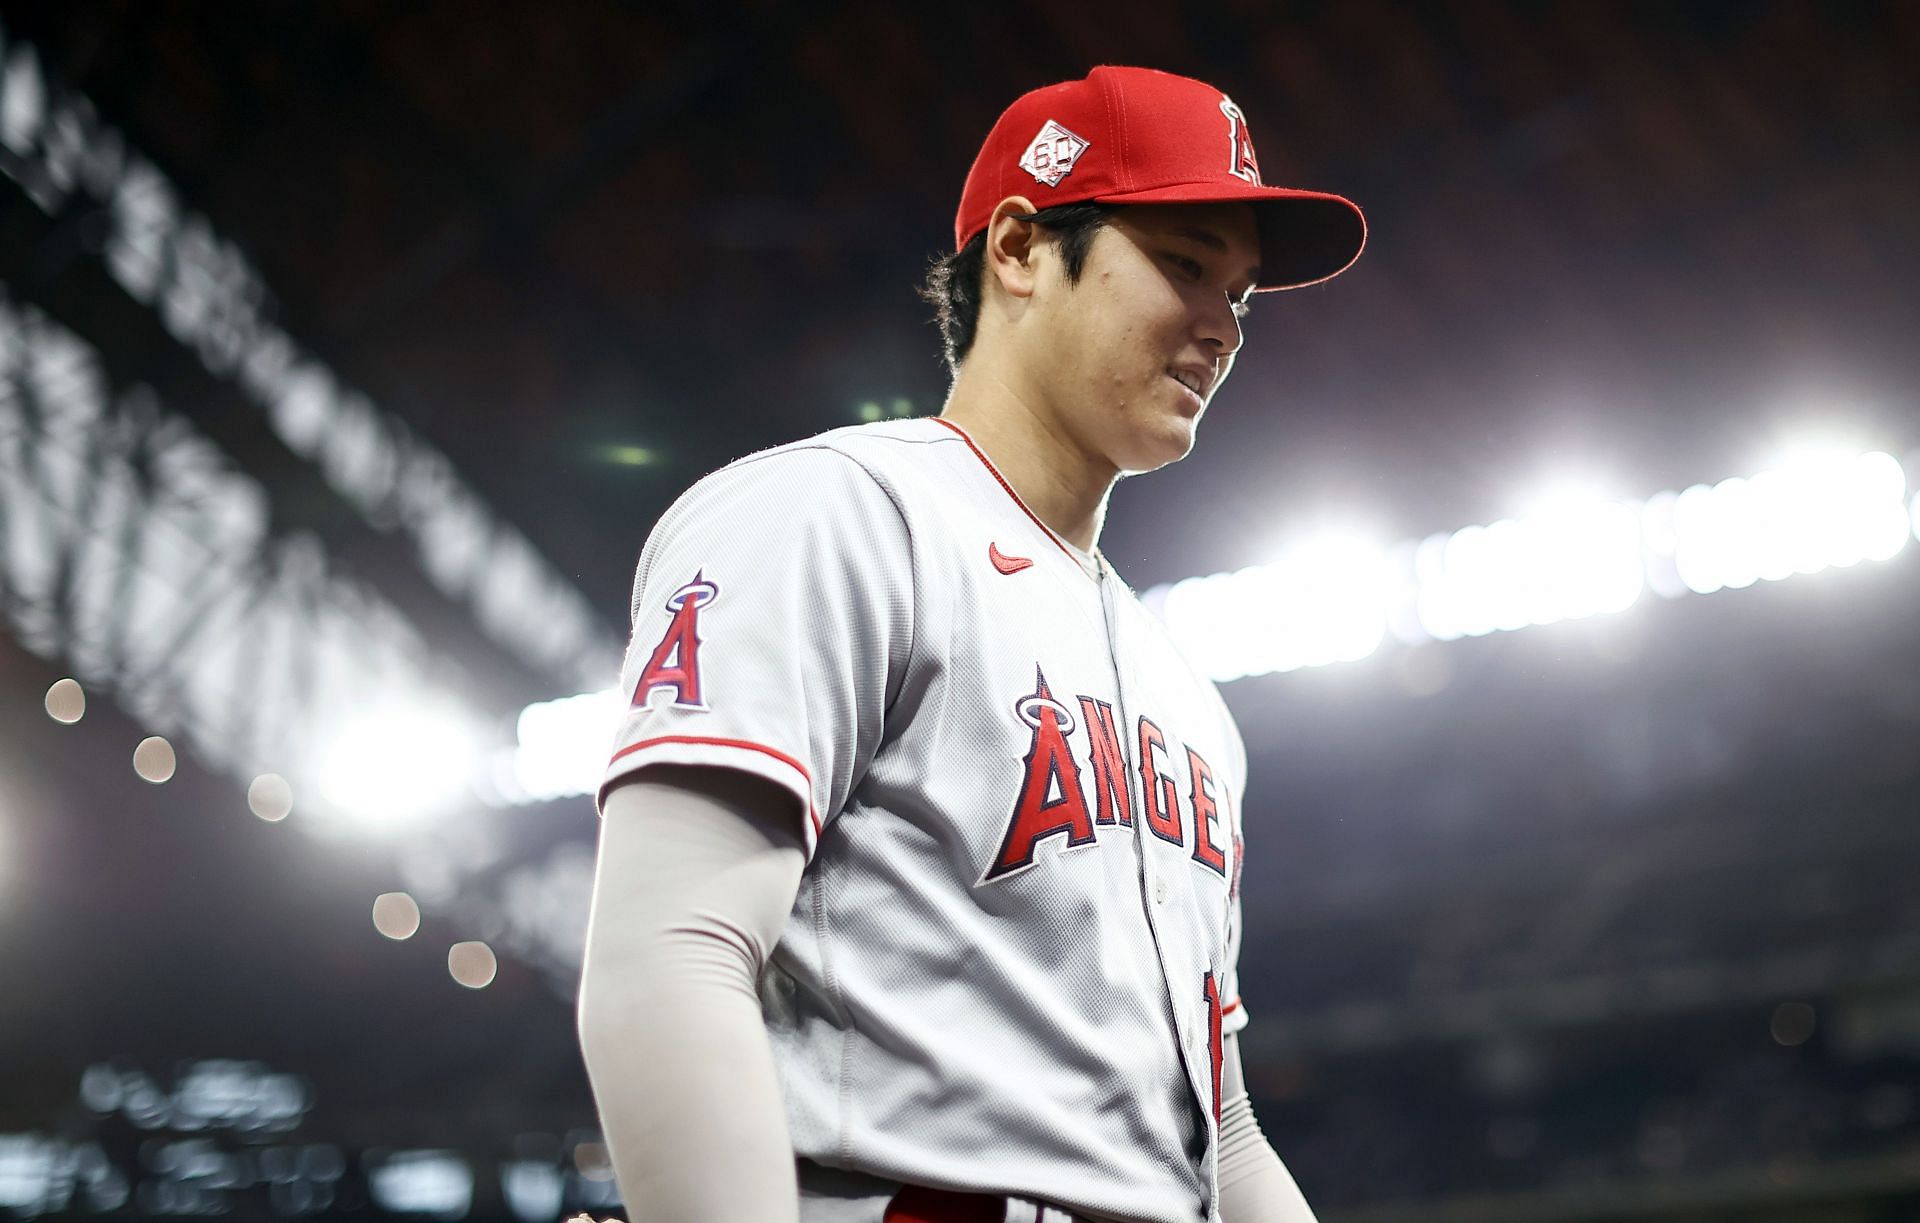 Watch: Shohei Ohtani throws a blazing 100 mile per hour pitch in